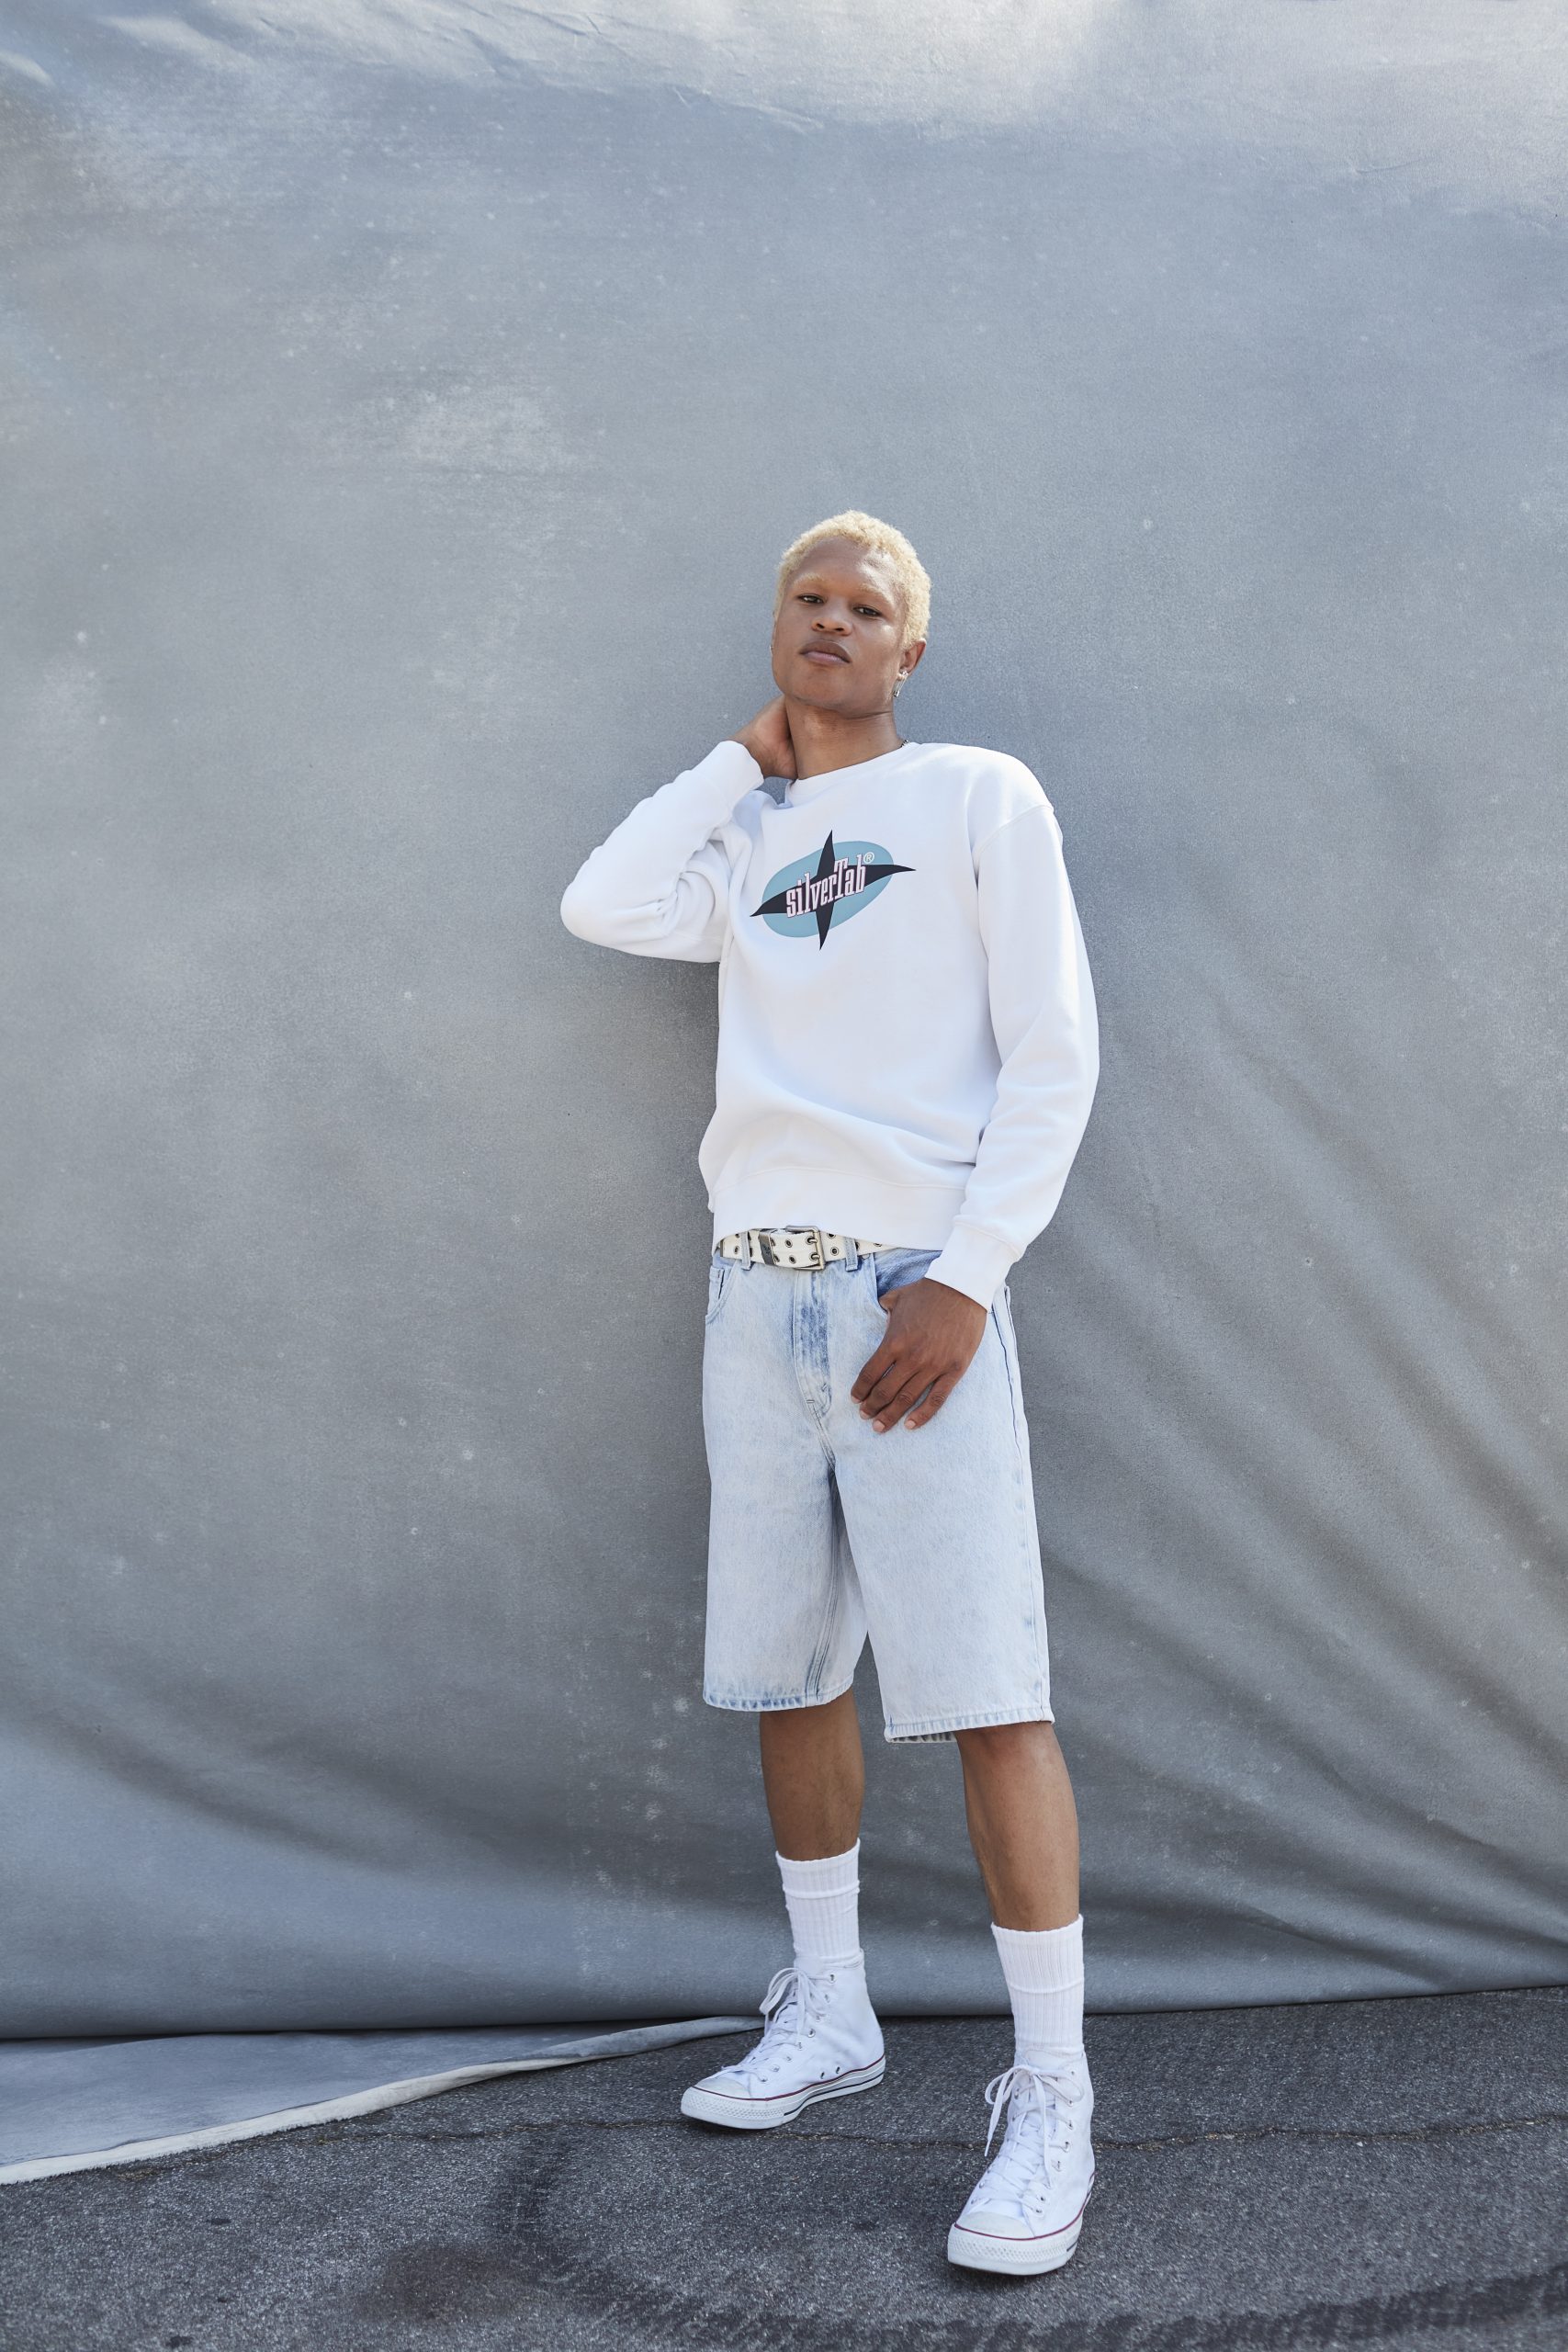 Oversized 90s Styles and Attitudes are Back with Levi's SilverTab 